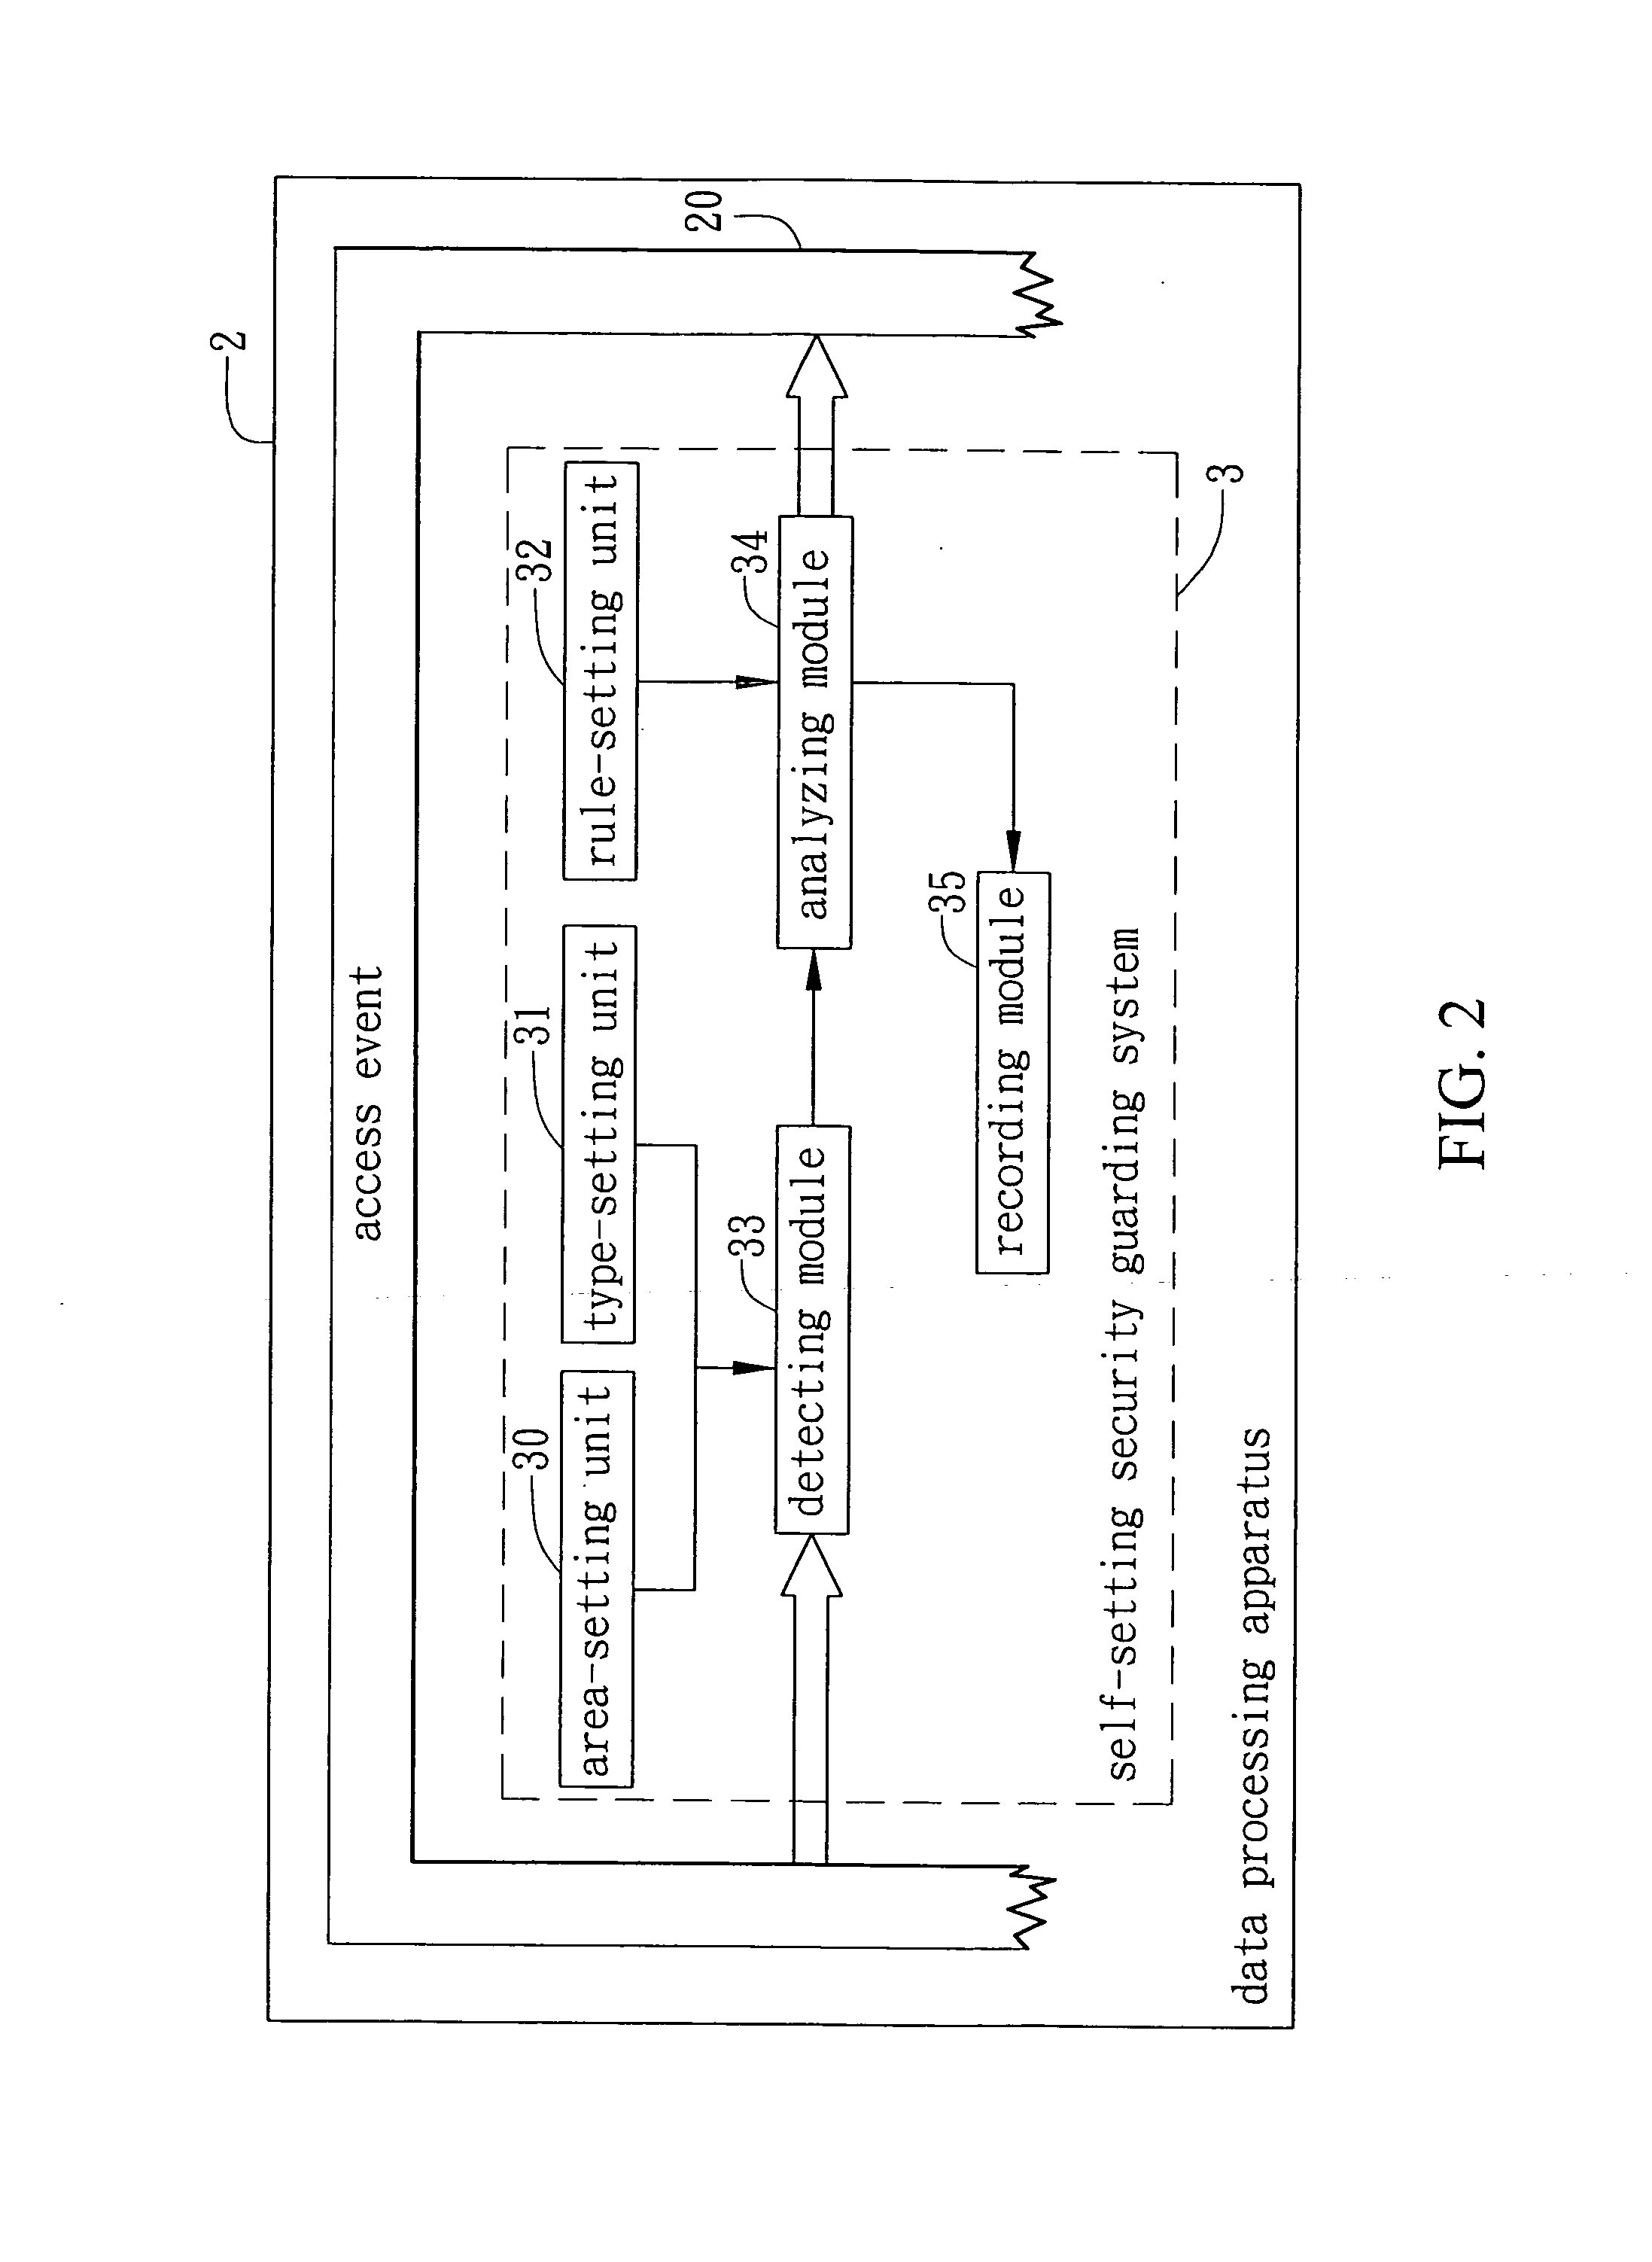 Self-setting security system and method for guarding against unauthorized access to data and preventing malicious attacks